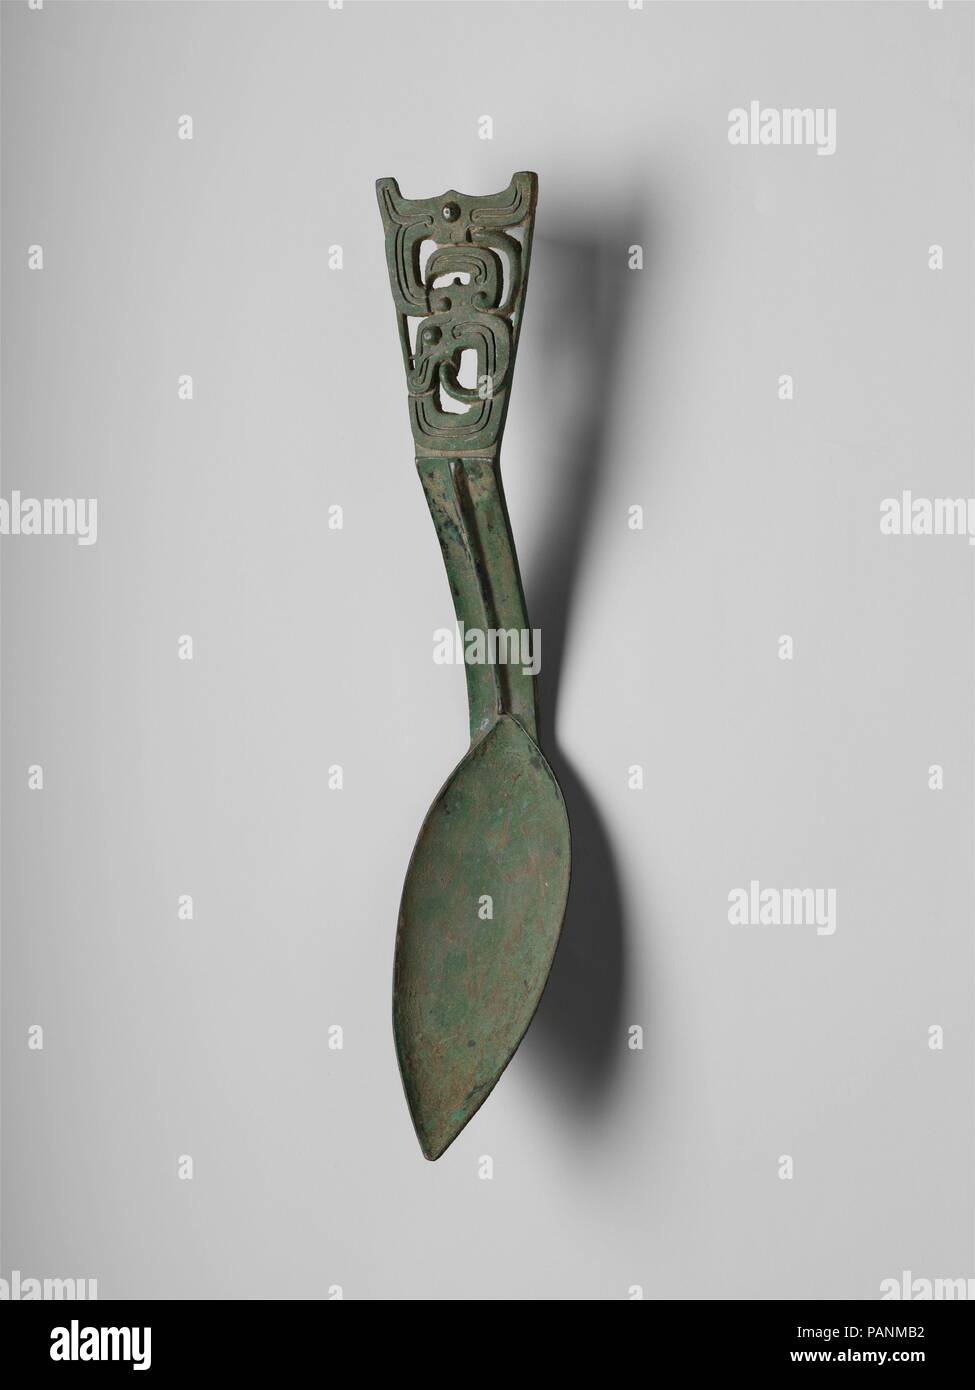 Spoon (Bi). Culture: China. Dimensions: W. 2 1/2 in. (6.4 cm); L. 12 3/4 in. (32.4 cm); Wt. 1 lb. (0.5 kg). Date: late 9th-early 8th century B.C.. Museum: Metropolitan Museum of Art, New York, USA. Stock Photo